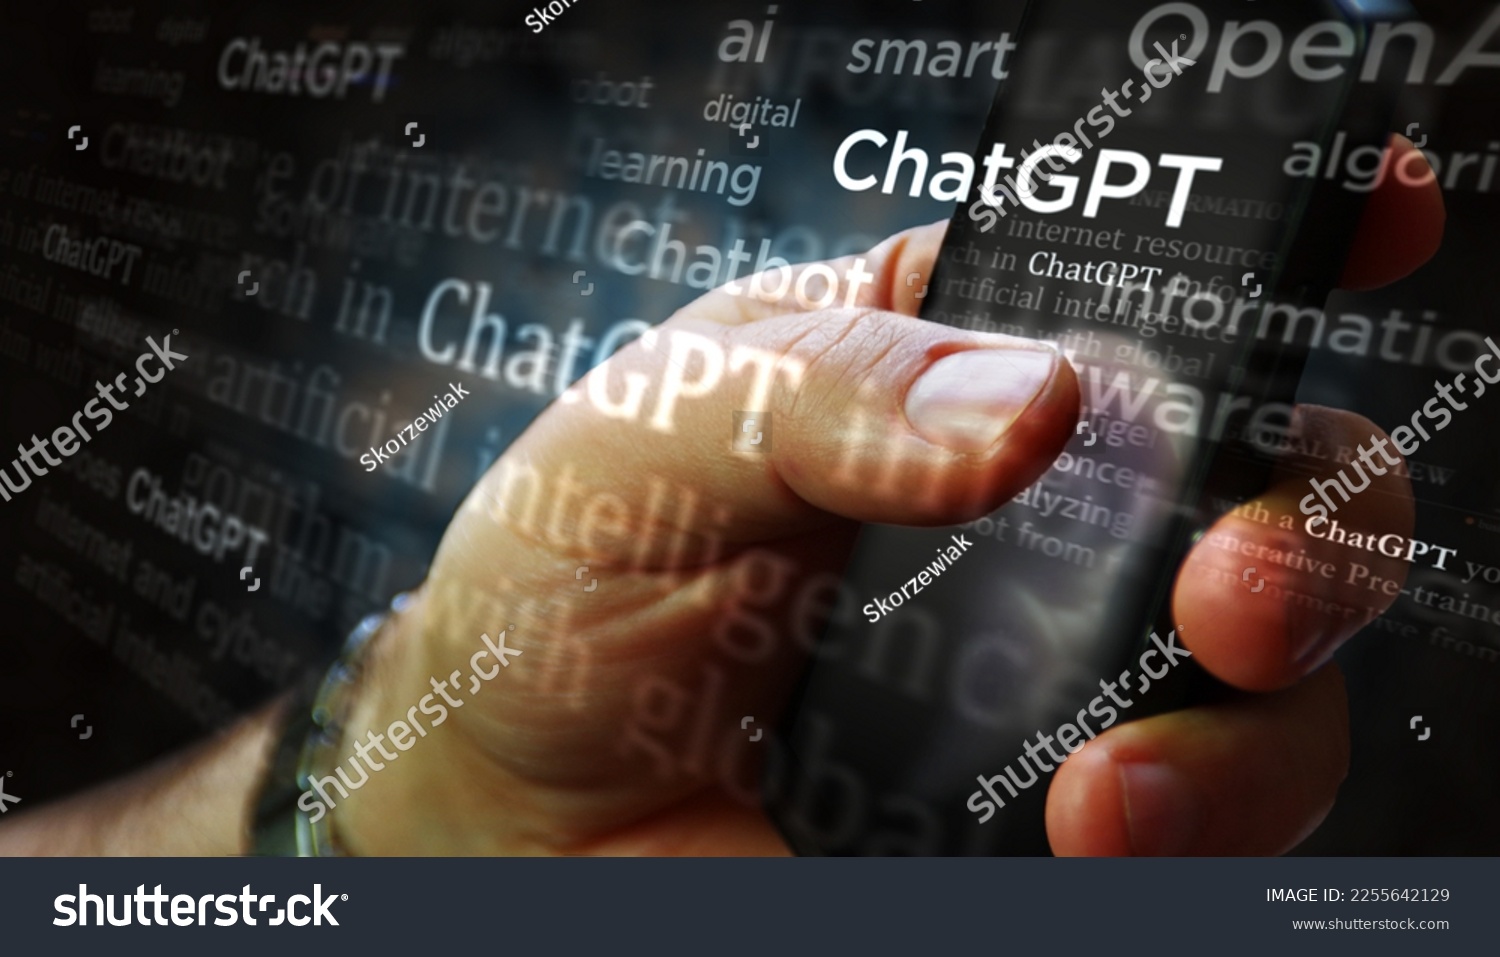 Poznan, Poland, January 25, 2023: ChatGPT  media on display with OpenAI, chat gpt ai bot. Searching on tablet, pad, phone or smartphone screen in hand. Abstract concept news titles 3d illustration. #2255642129